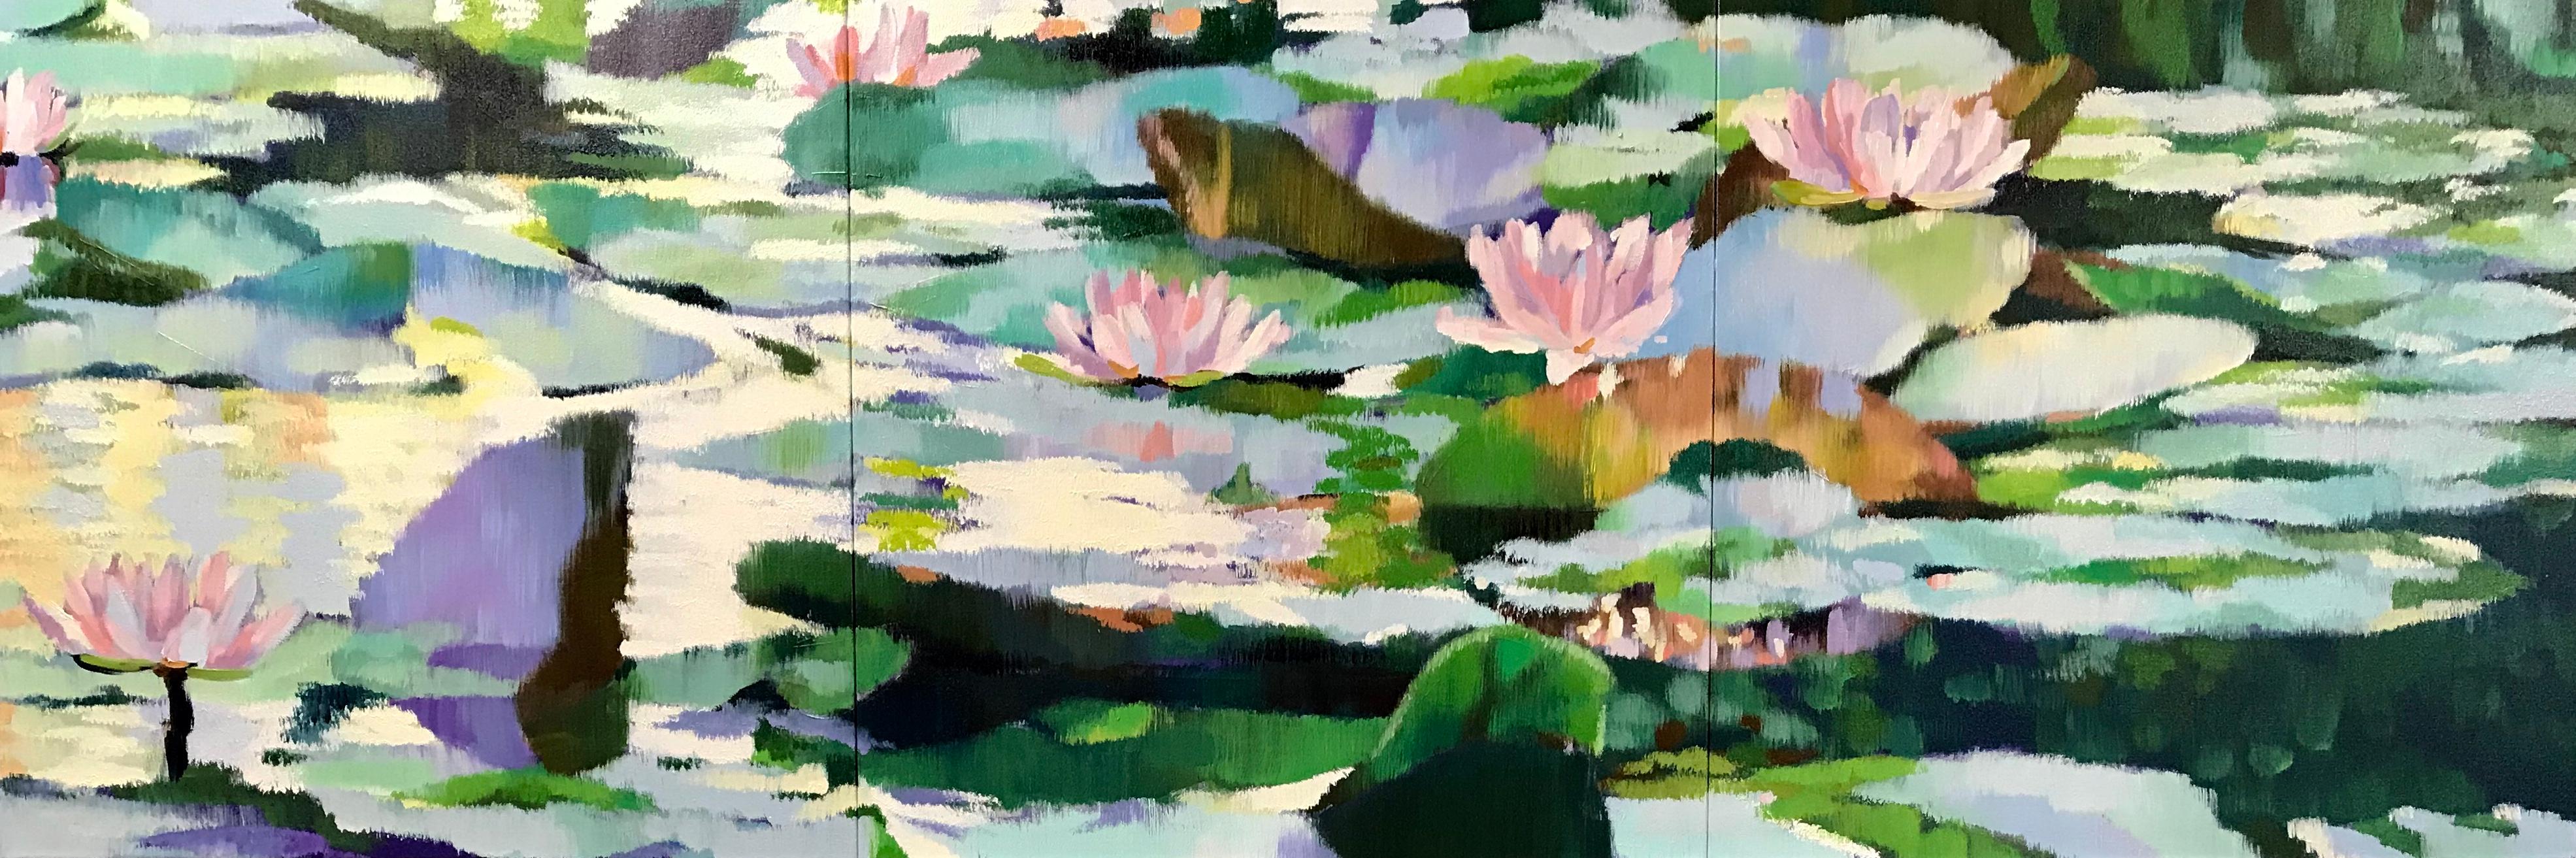 Jill Hackney Landscape Painting - "Giverny XII", Contemporary, Oil, Painting, Landscape, Waterscape, Impressionist